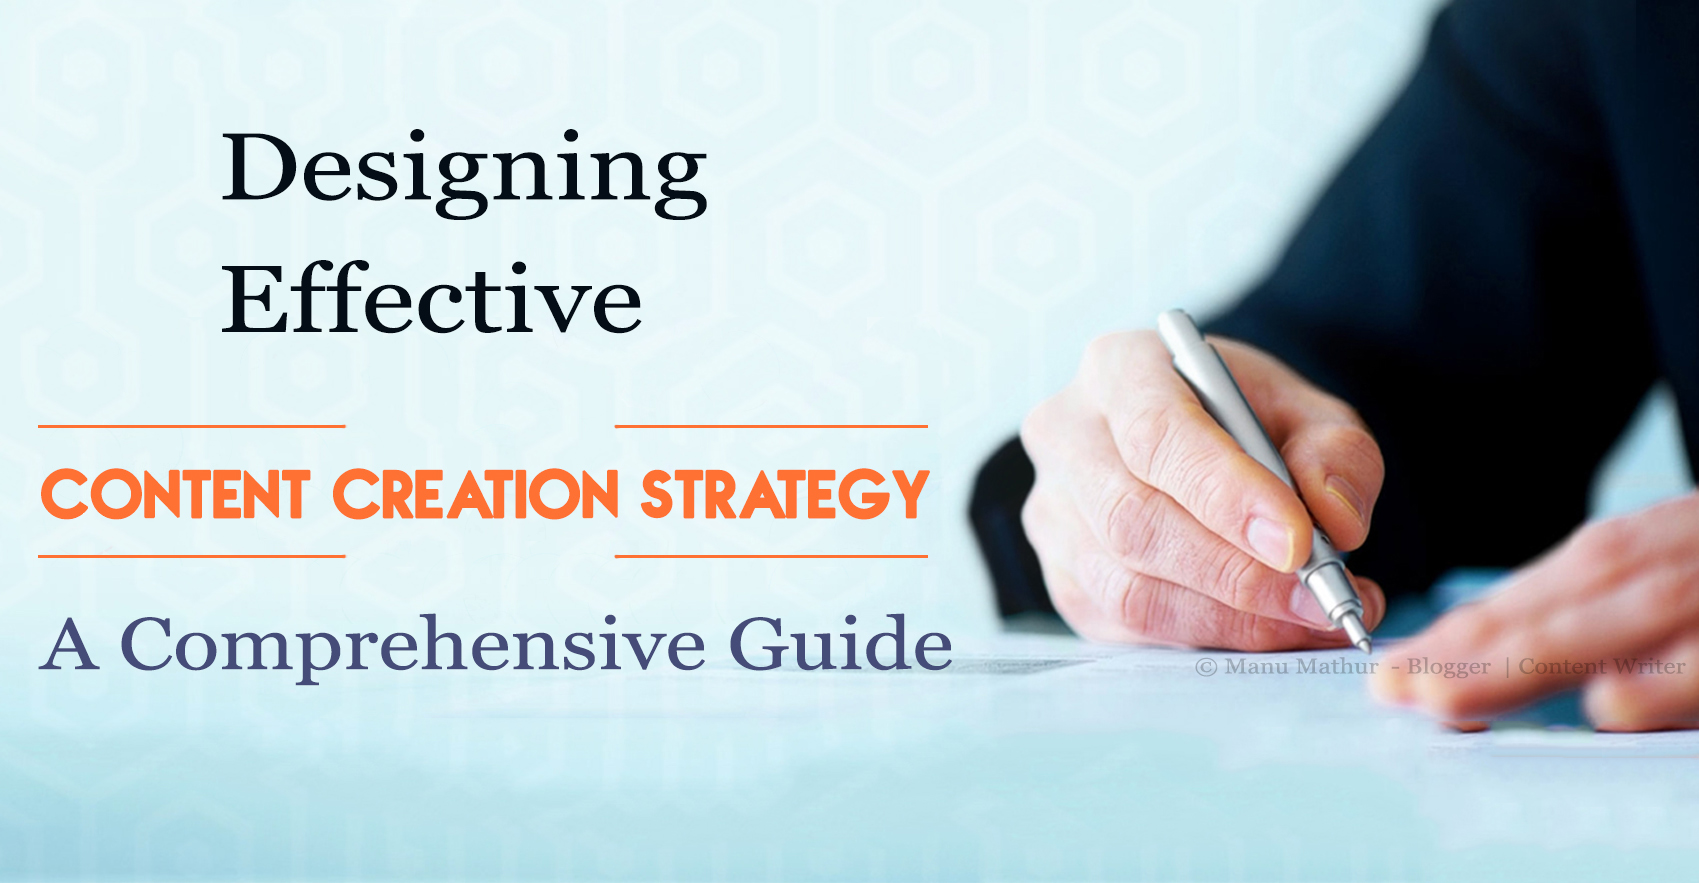 Content Creation Strategy- A Comprehensive Guide